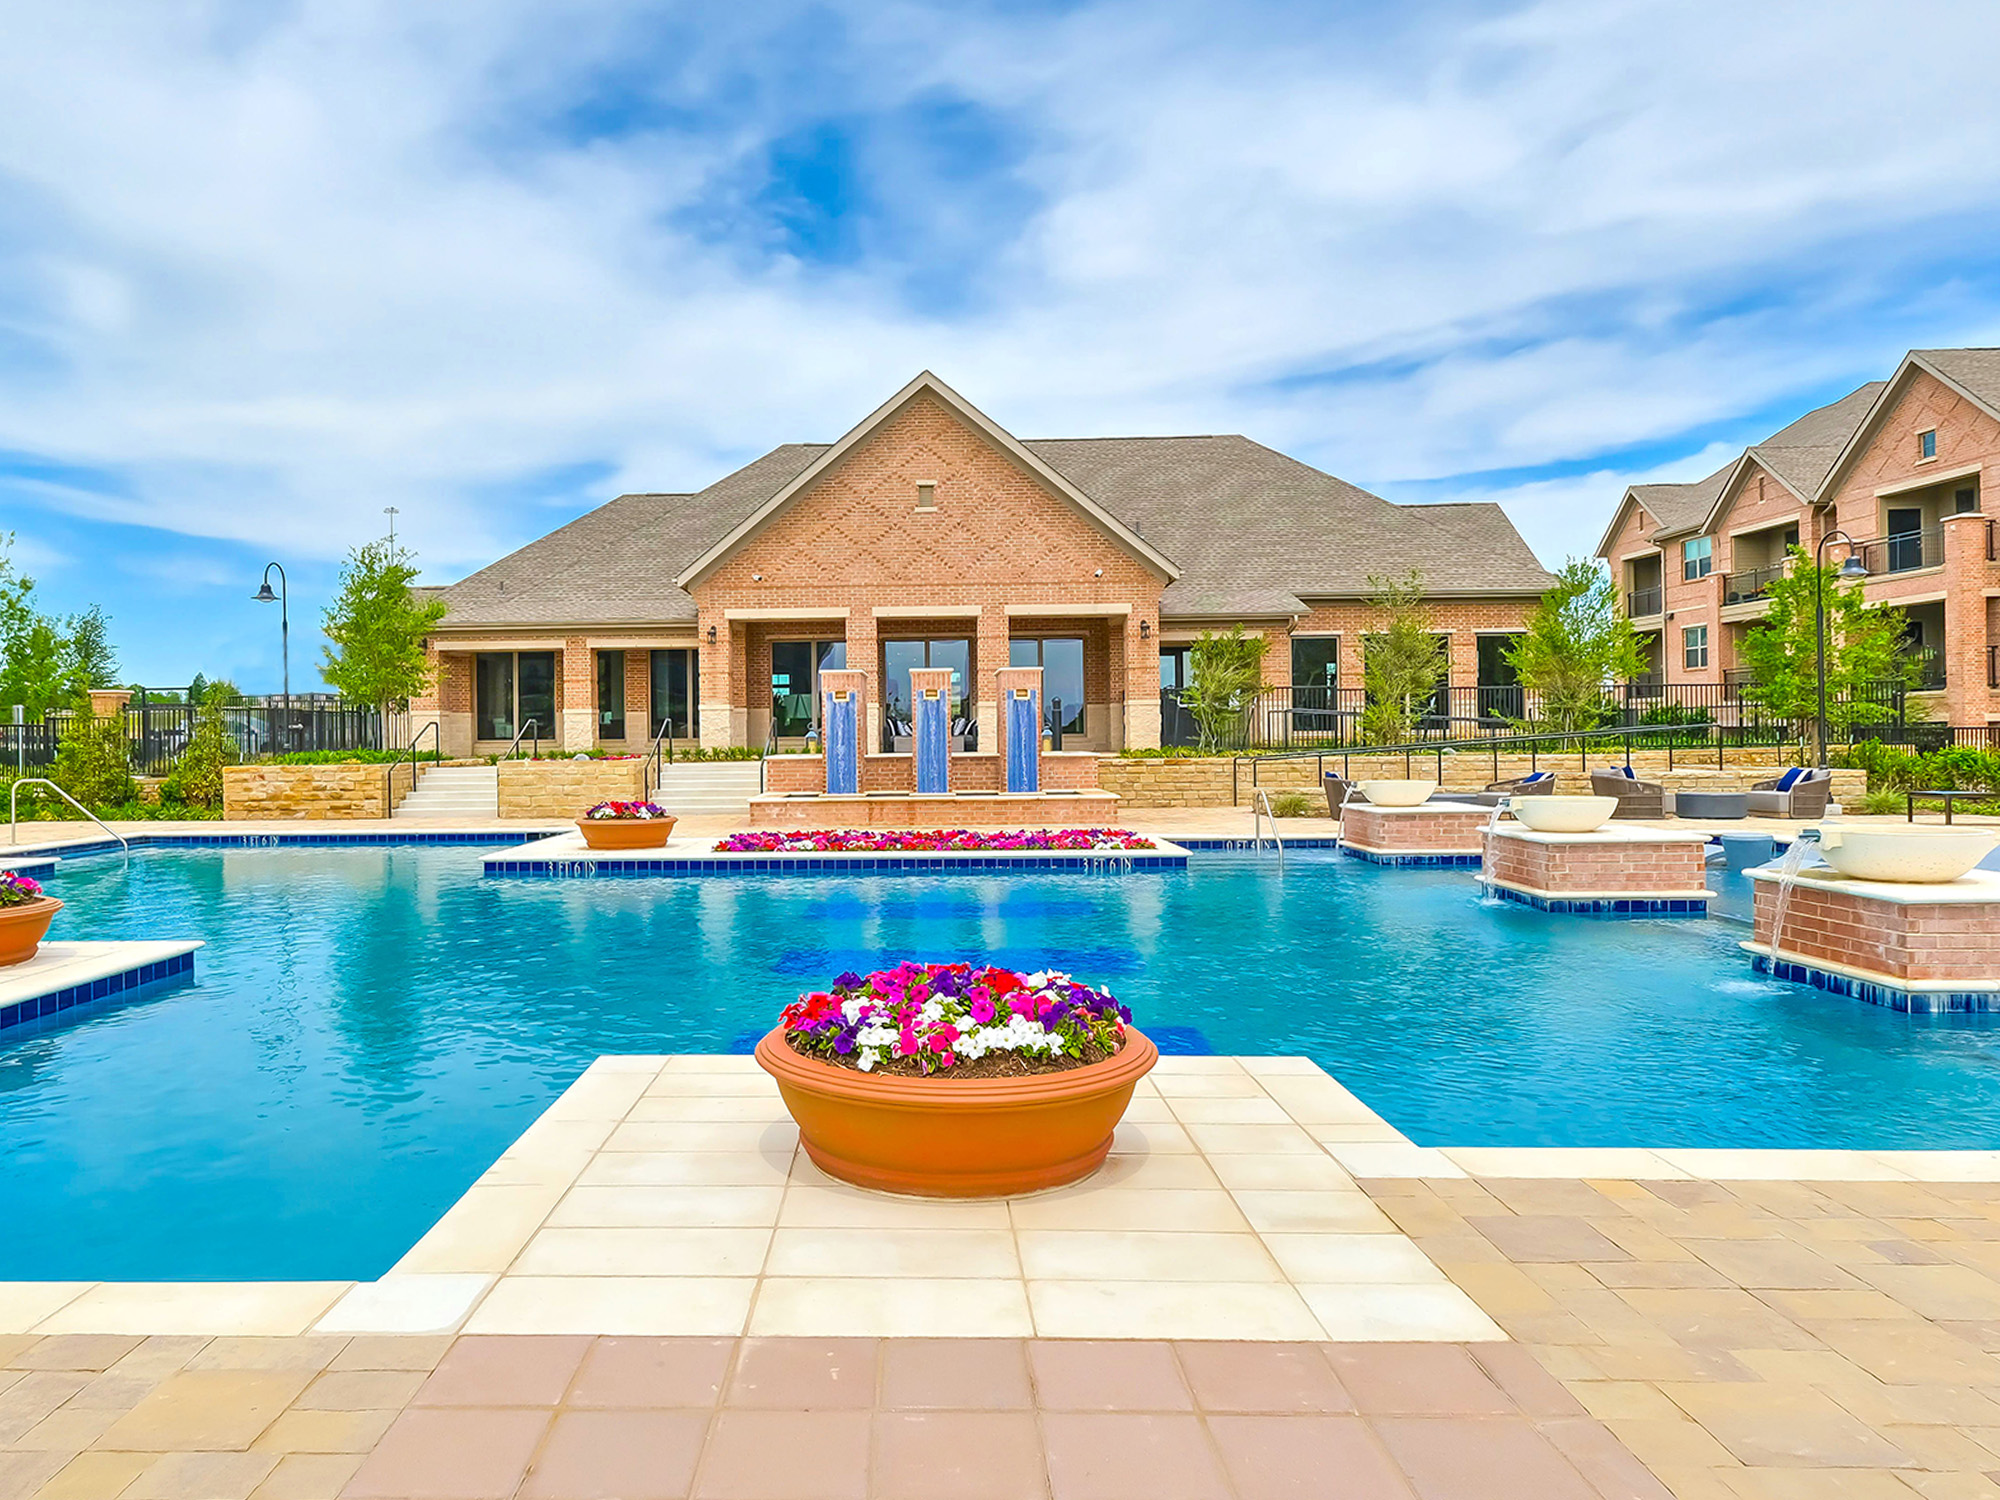 Korman Communities Enters The DFW Market With AVE Las Colinas